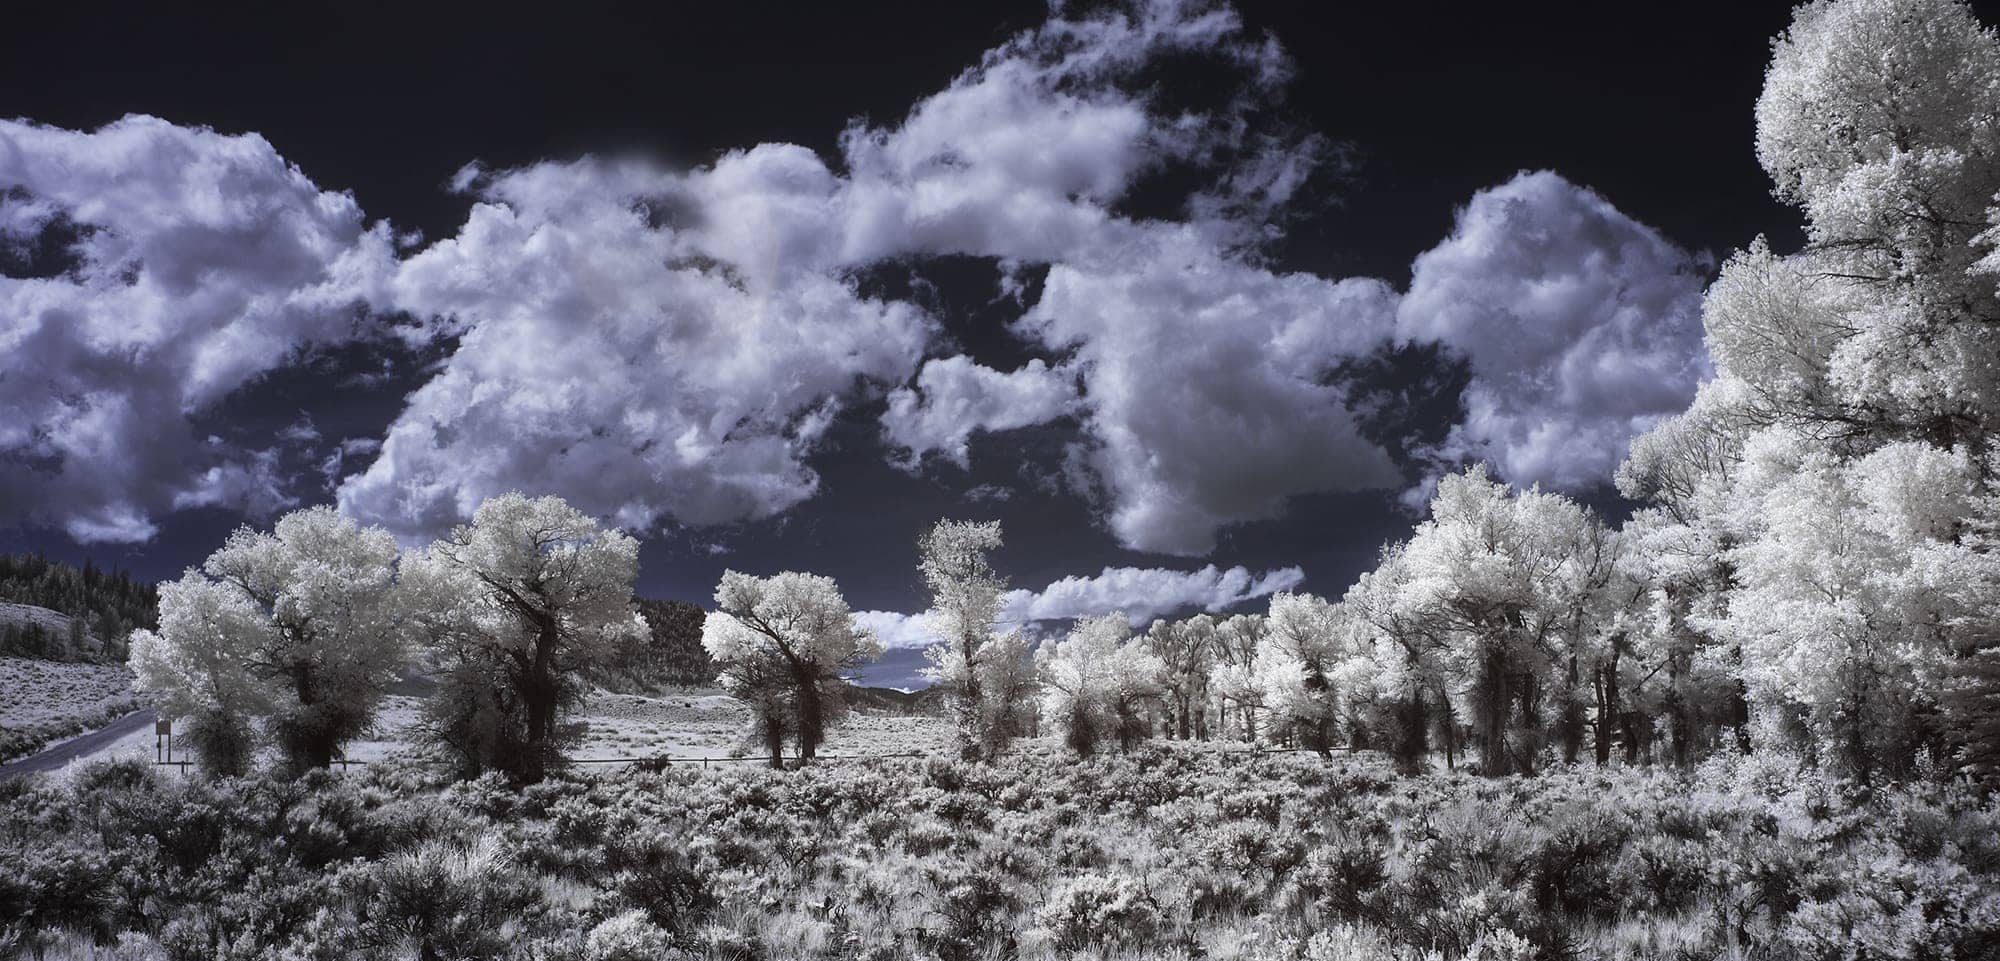 HOW TO TAKE YOUR FIRST INFRARED PHOTOGRAPHY?